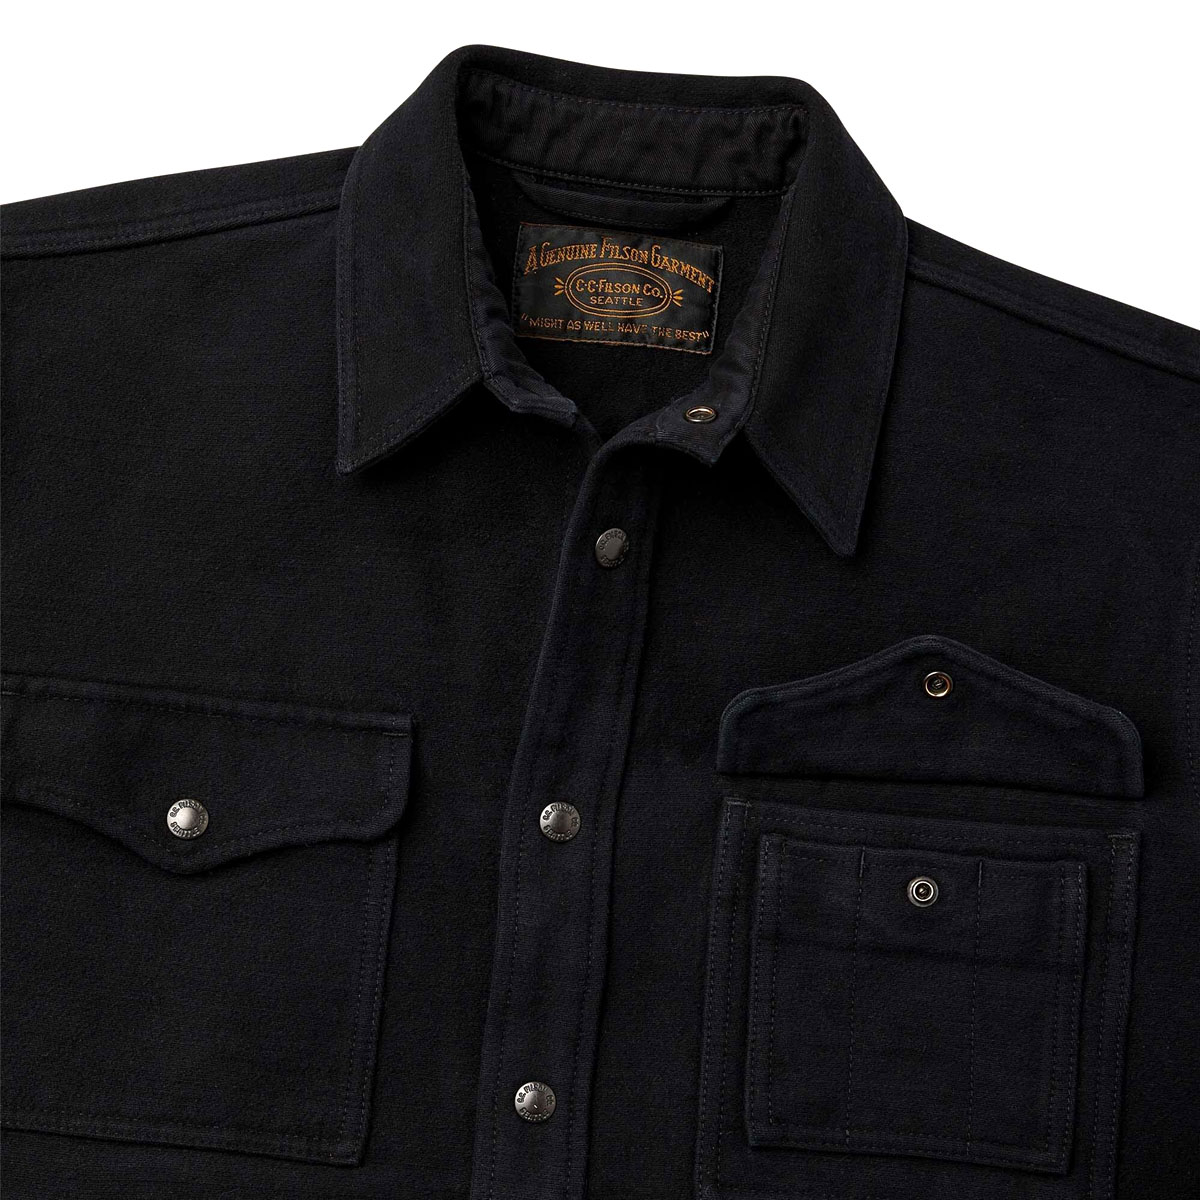 Filson Beartooth Camp Jacket Navy/Black, built with thick and warm double-cloth cotton.